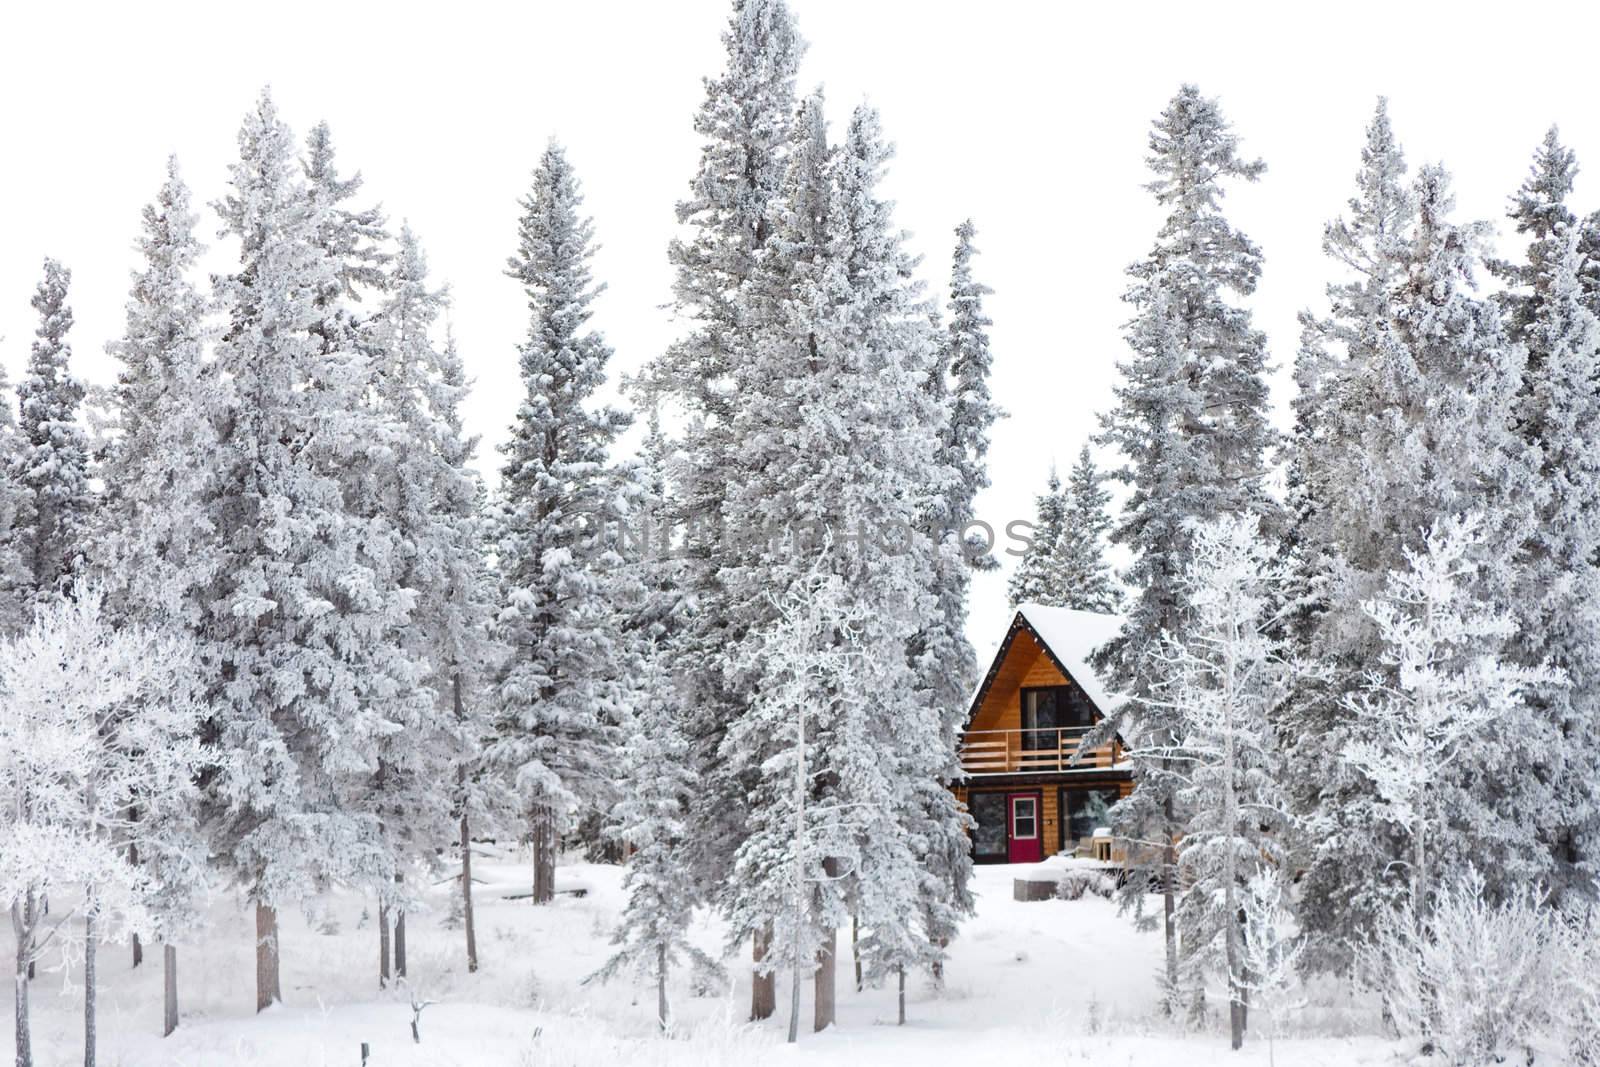 White Christmas in winter cabin in the woods between snow covered spruce trees.